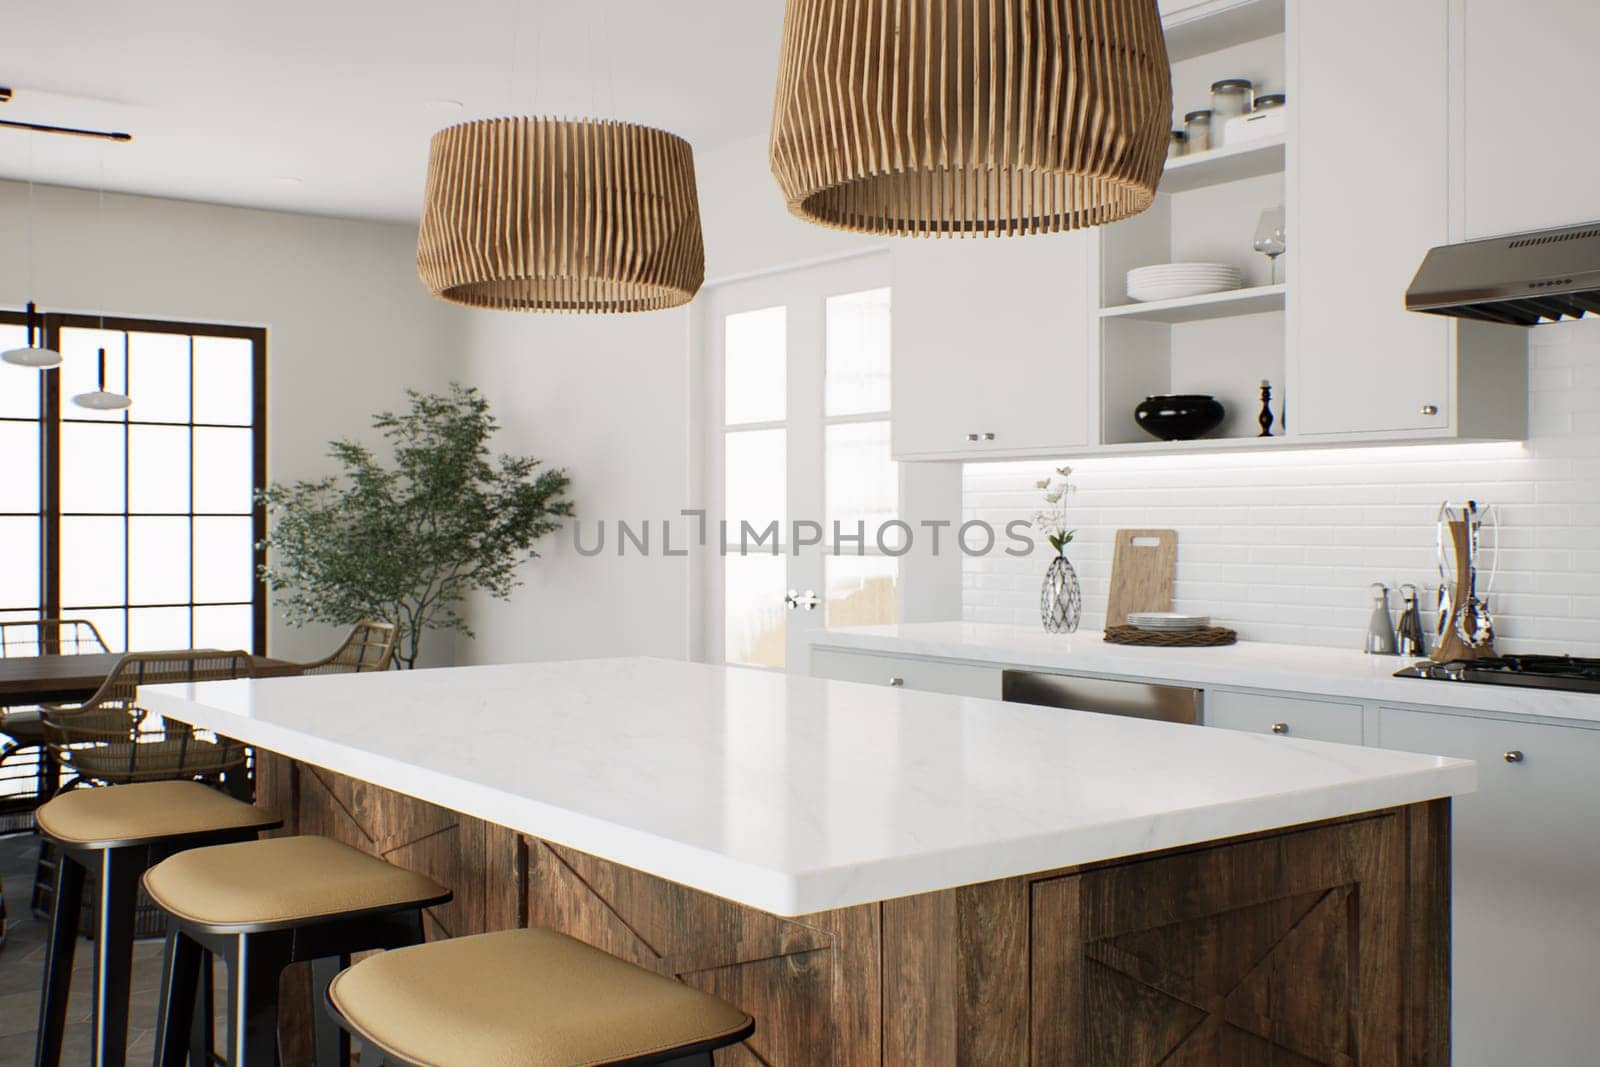 Focus on the marble countertop against the backdrop of kitchen appliances and utensils. Stylish traditional kitchen with wooden fixtures. 3D rendering